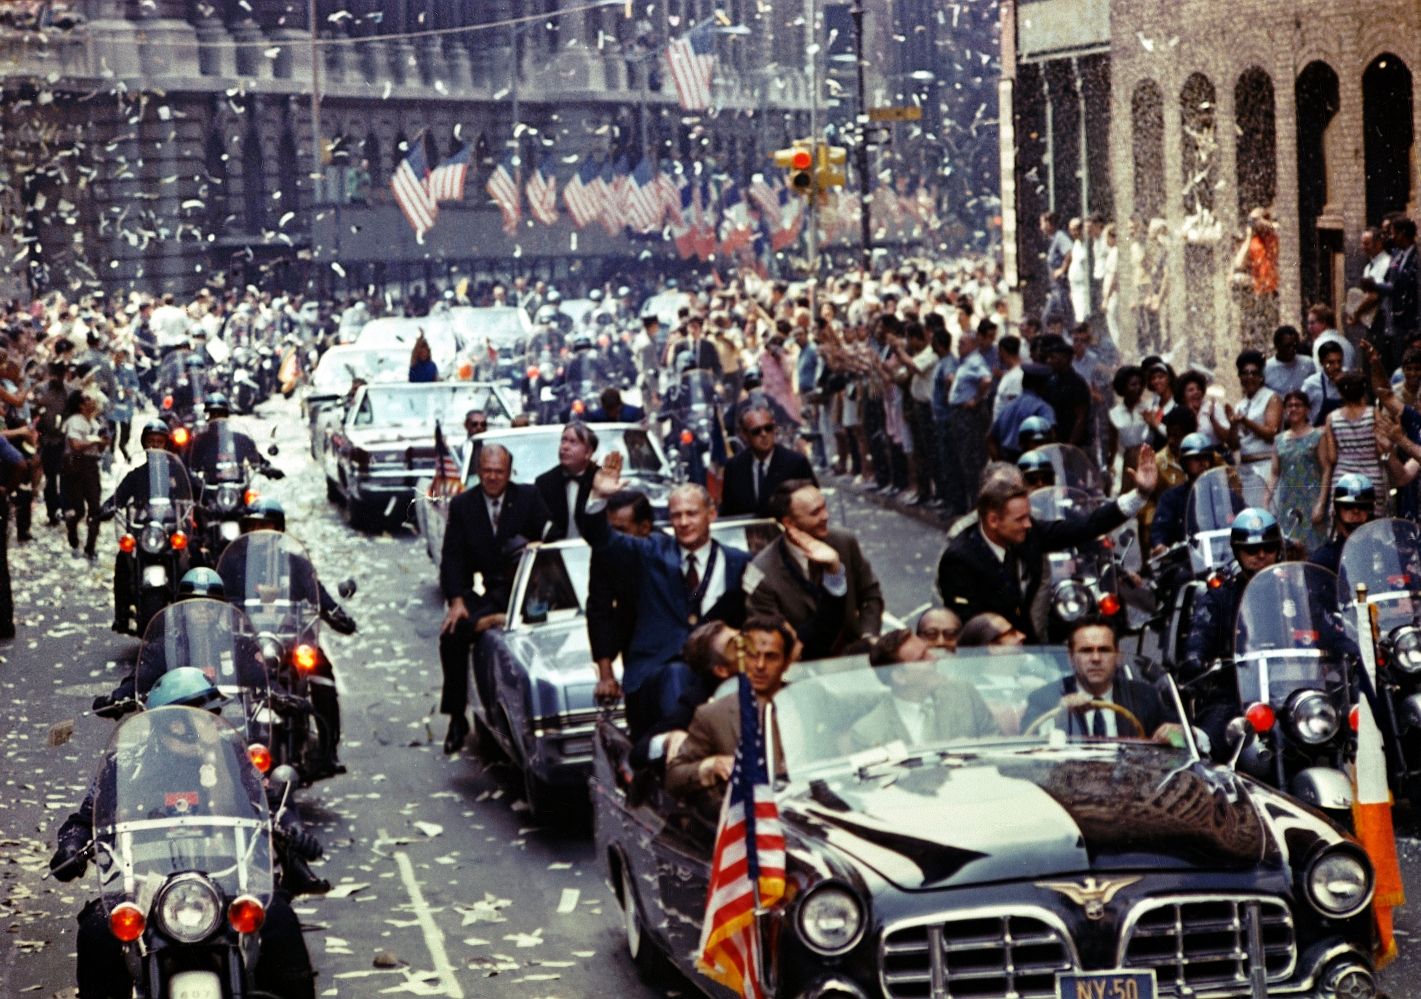 New York City welcomes the crew of Apollo 11 during a ticker tape parade in August 1969, following the astronauts' return to Earth. In the aftermath of Apollo 11's landing on the Moon, public interest toward the space program waned and quickly evaporated. Image Credit: NASA